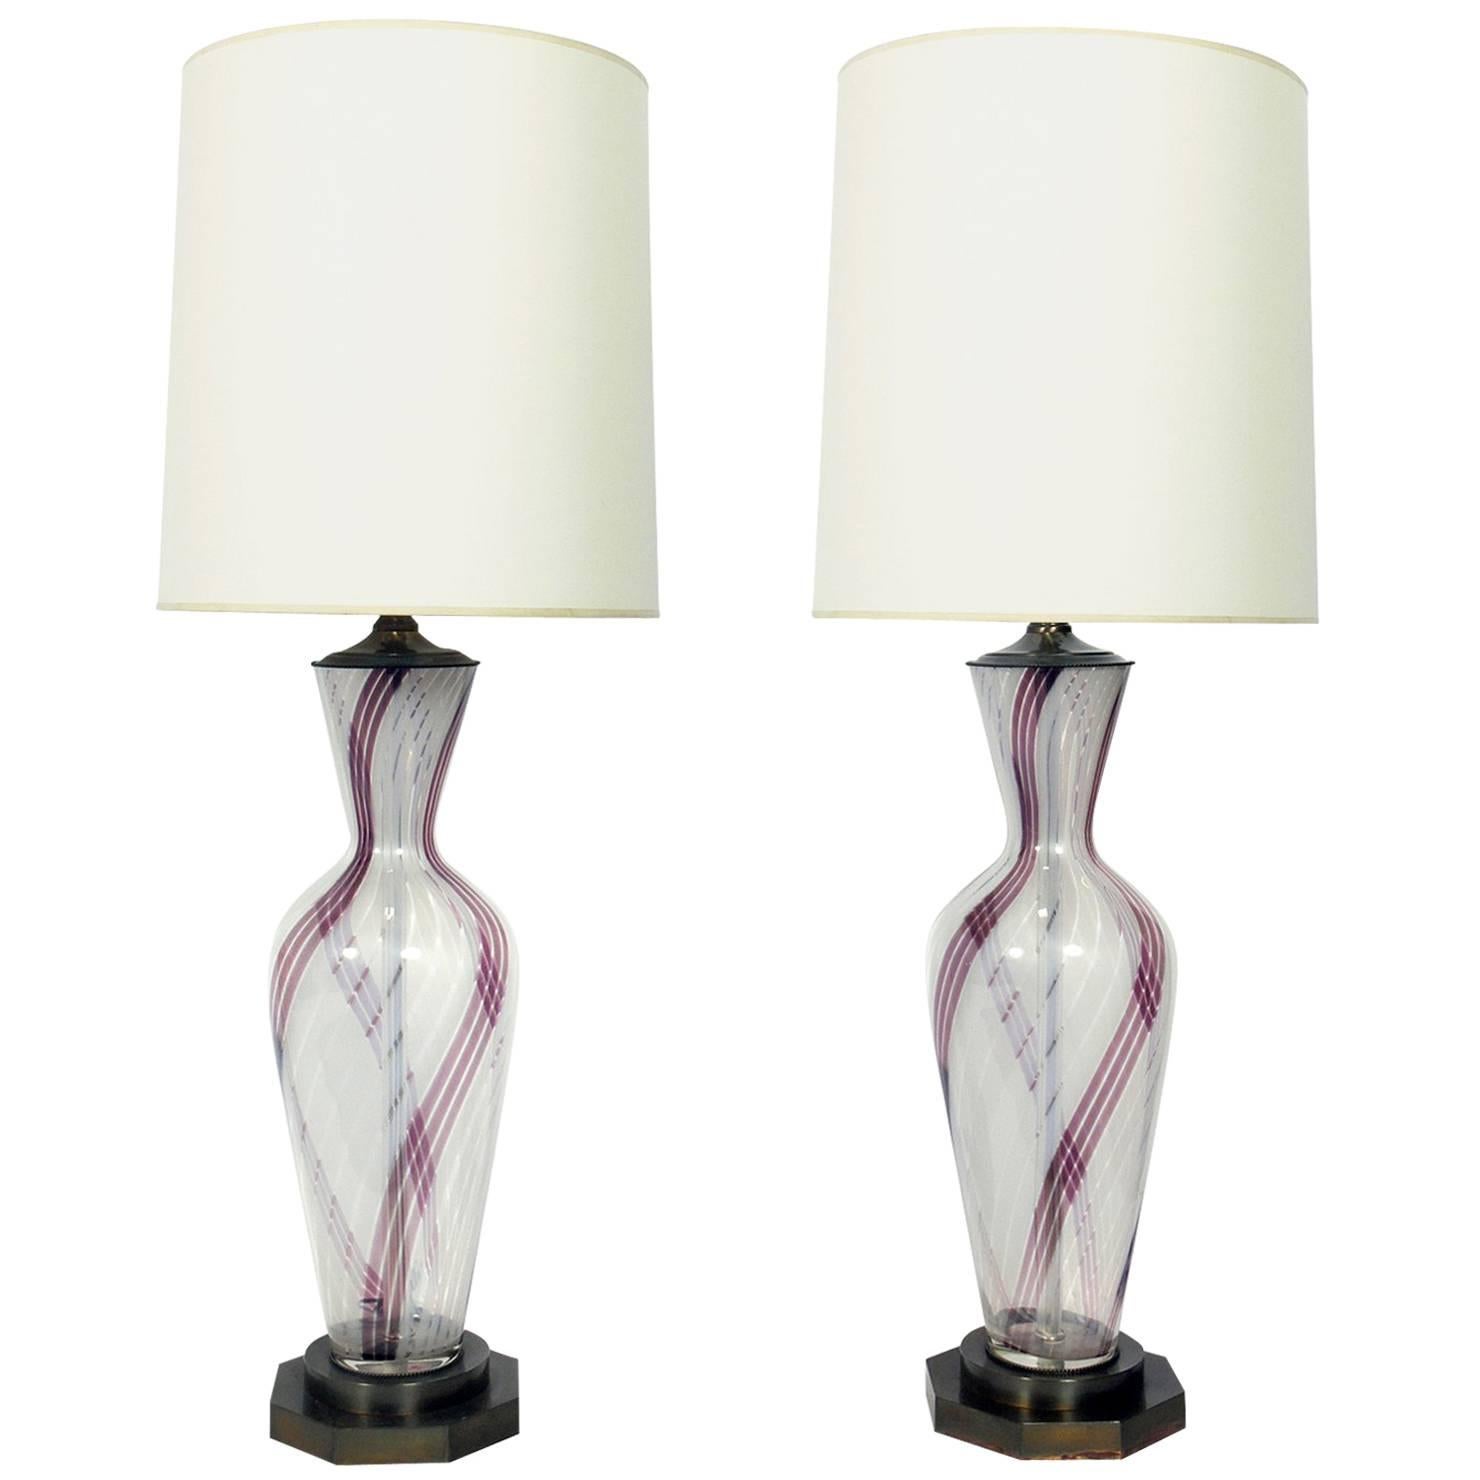 Pair of Large Scale Murano Glass Lamps